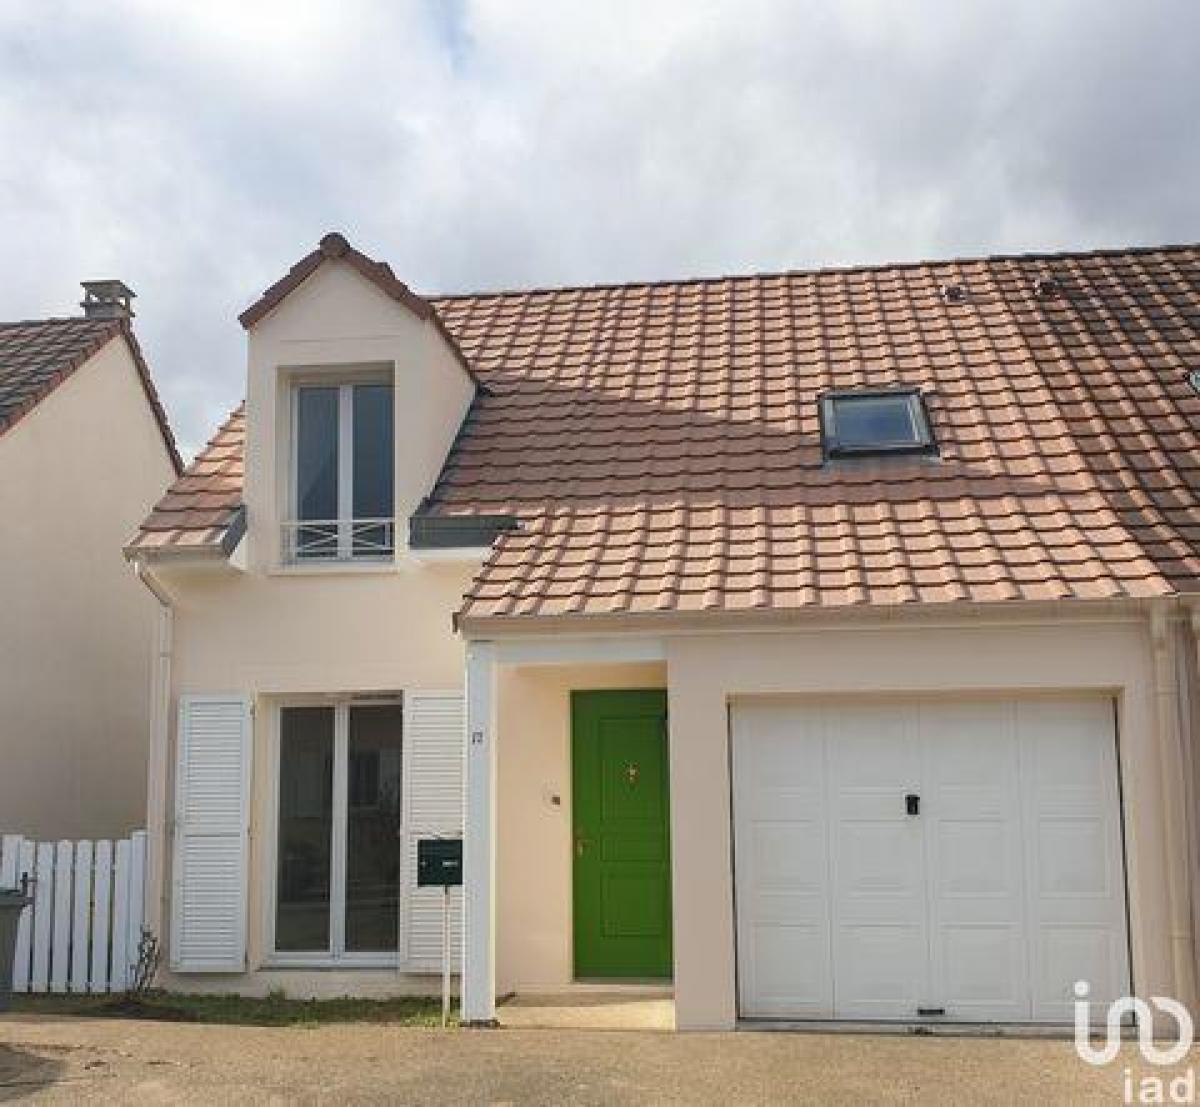 Picture of Home For Sale in Ballainvilliers, Bretagne, France